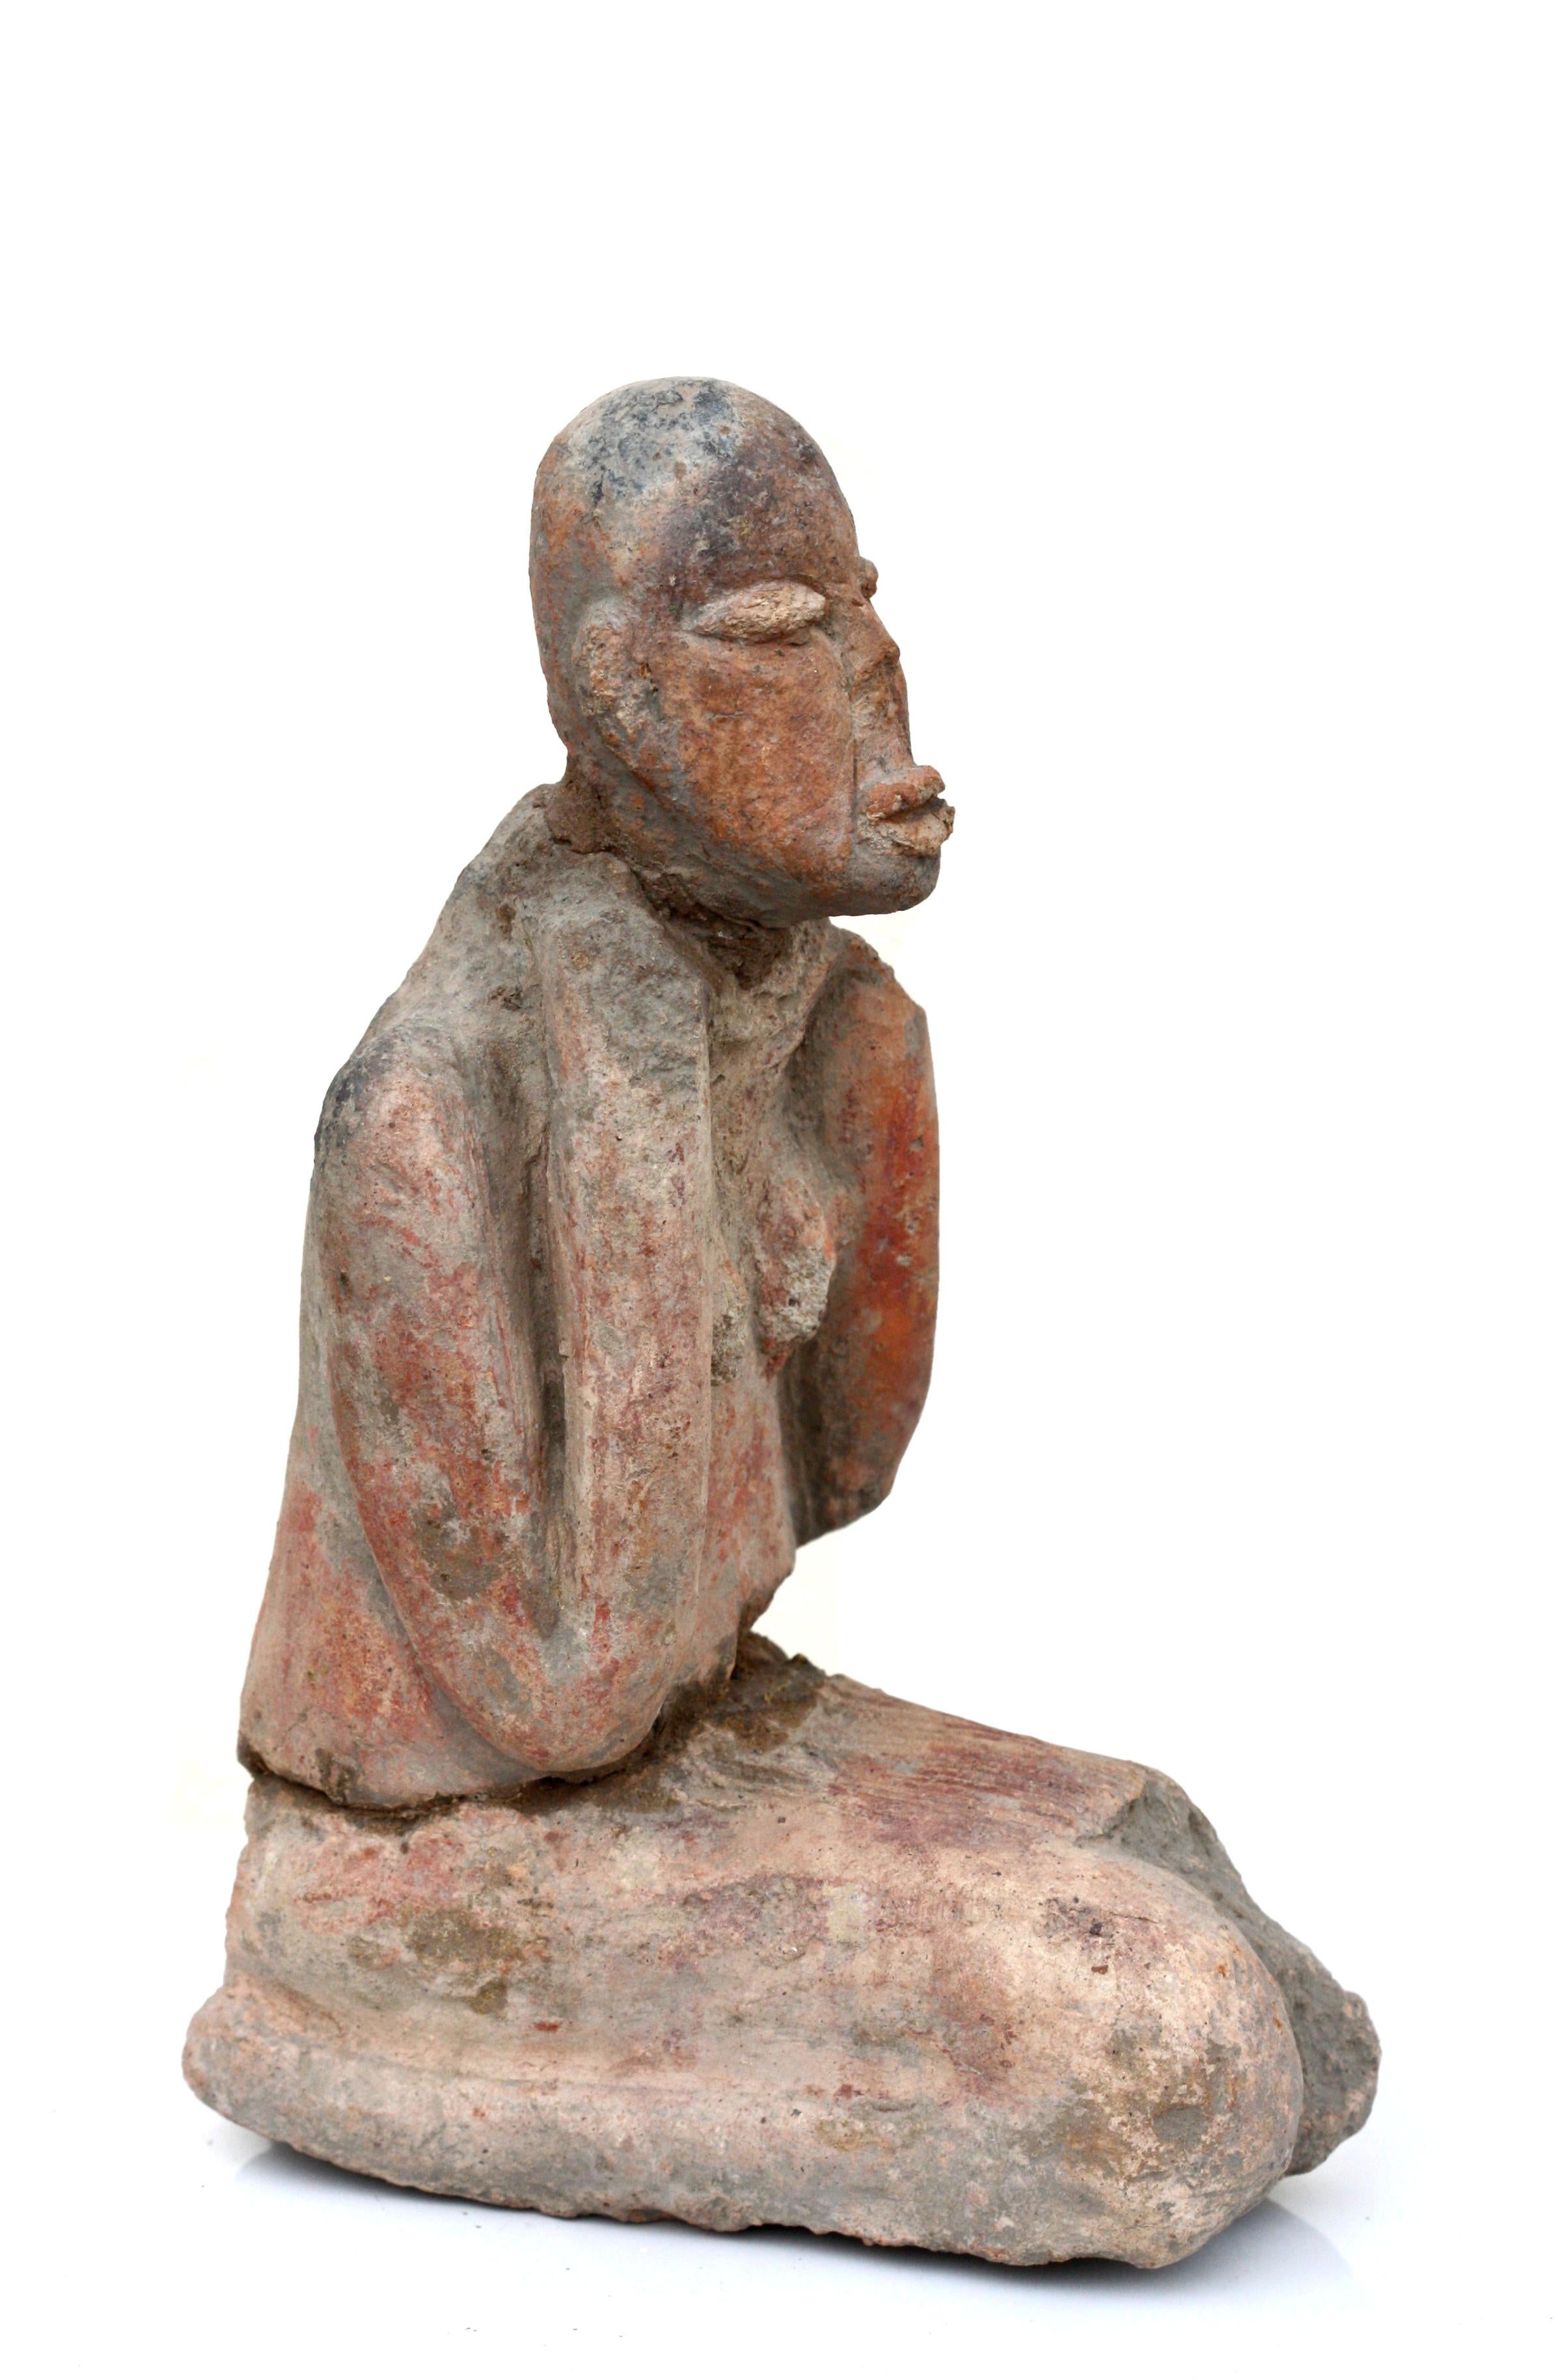 Republic of Mali terracotta figure of a female ancestral figure.
kneeling with her feet under her, arms to her shoulder,
circa AD 1100 - 1400 
Measures: Height 9 1/2 in. 24.1 cm.
Width 6 1/4 in. 15.8 cm.